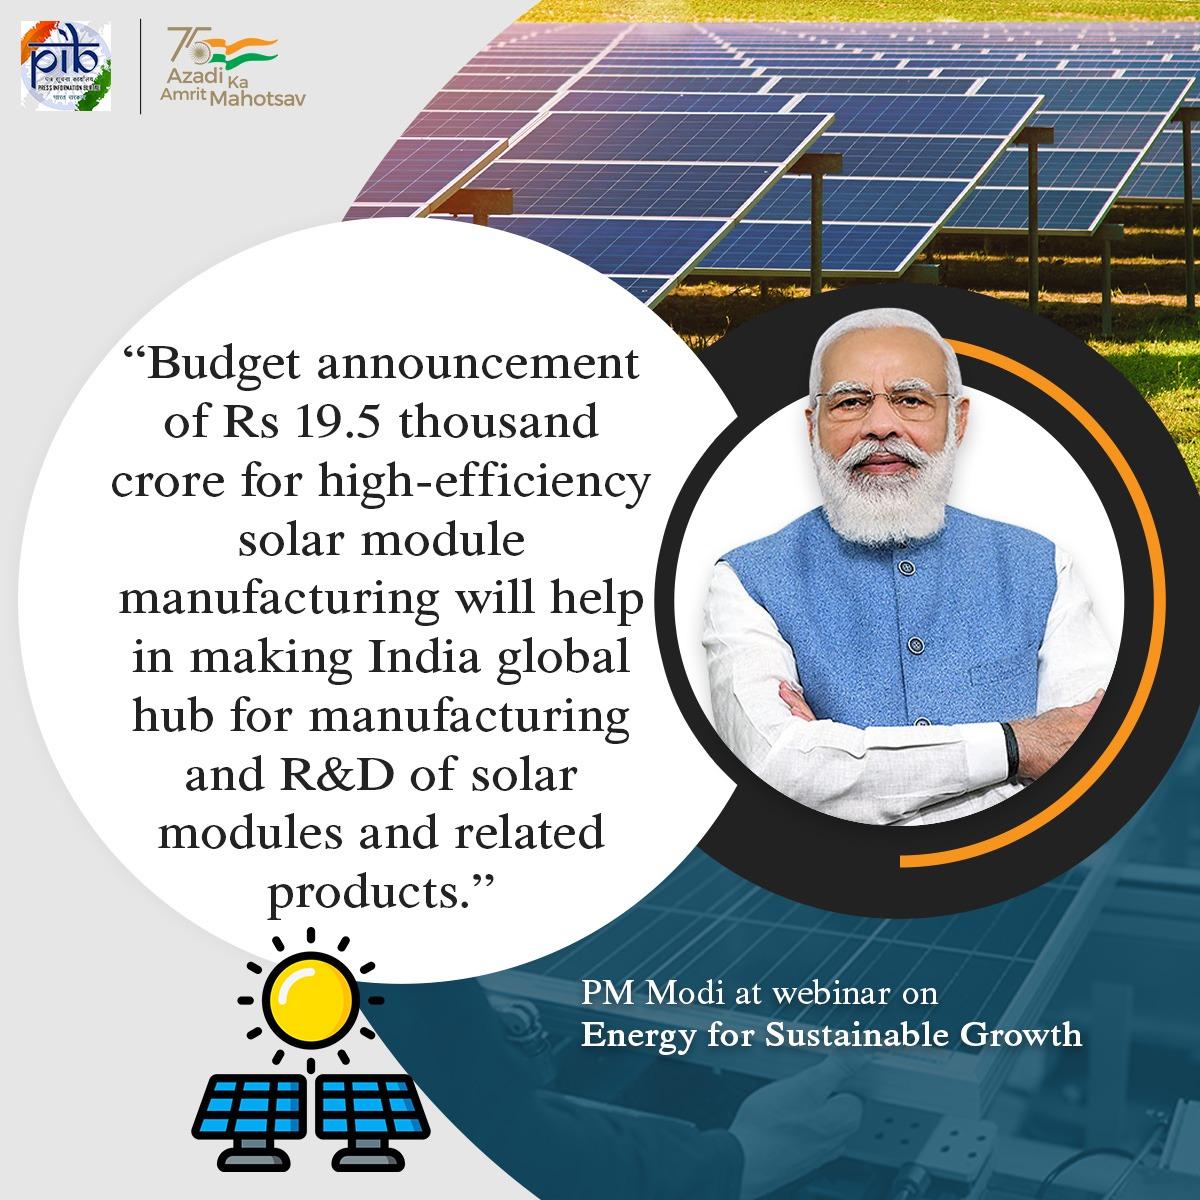 PIB India on Twitter: "This budget has announced 19.5 thousand crore for high-efficiency solar module manufacturing which will help in making India a global hub for manufacturing and R&amp;D of solar modules